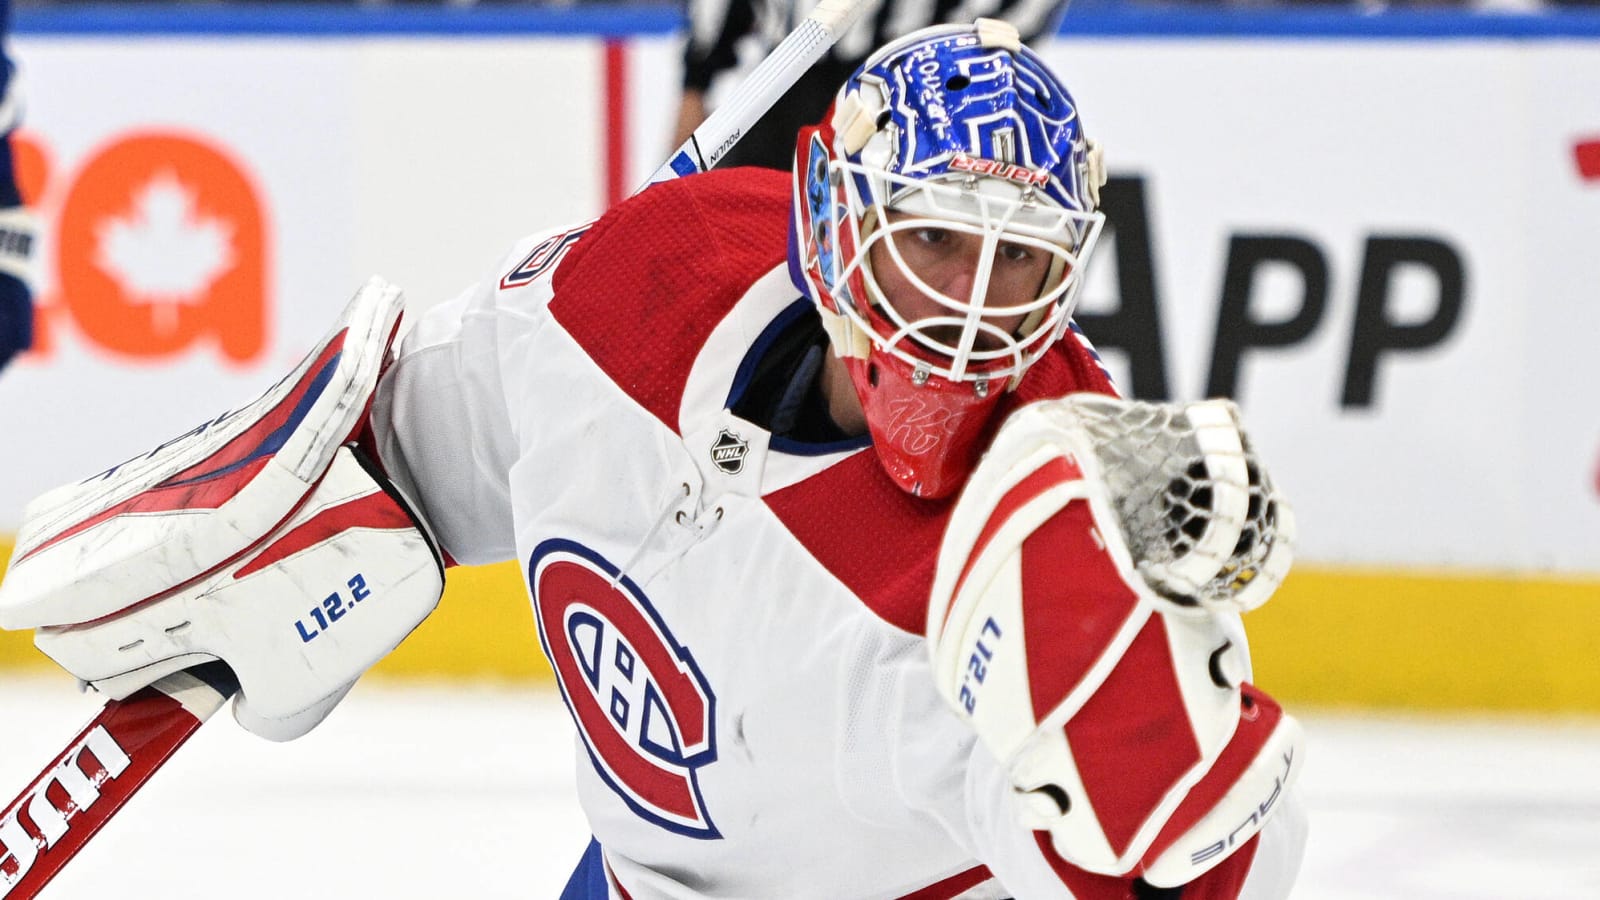 What I Got Wrong About The Canadiens: Samuel Montembeault